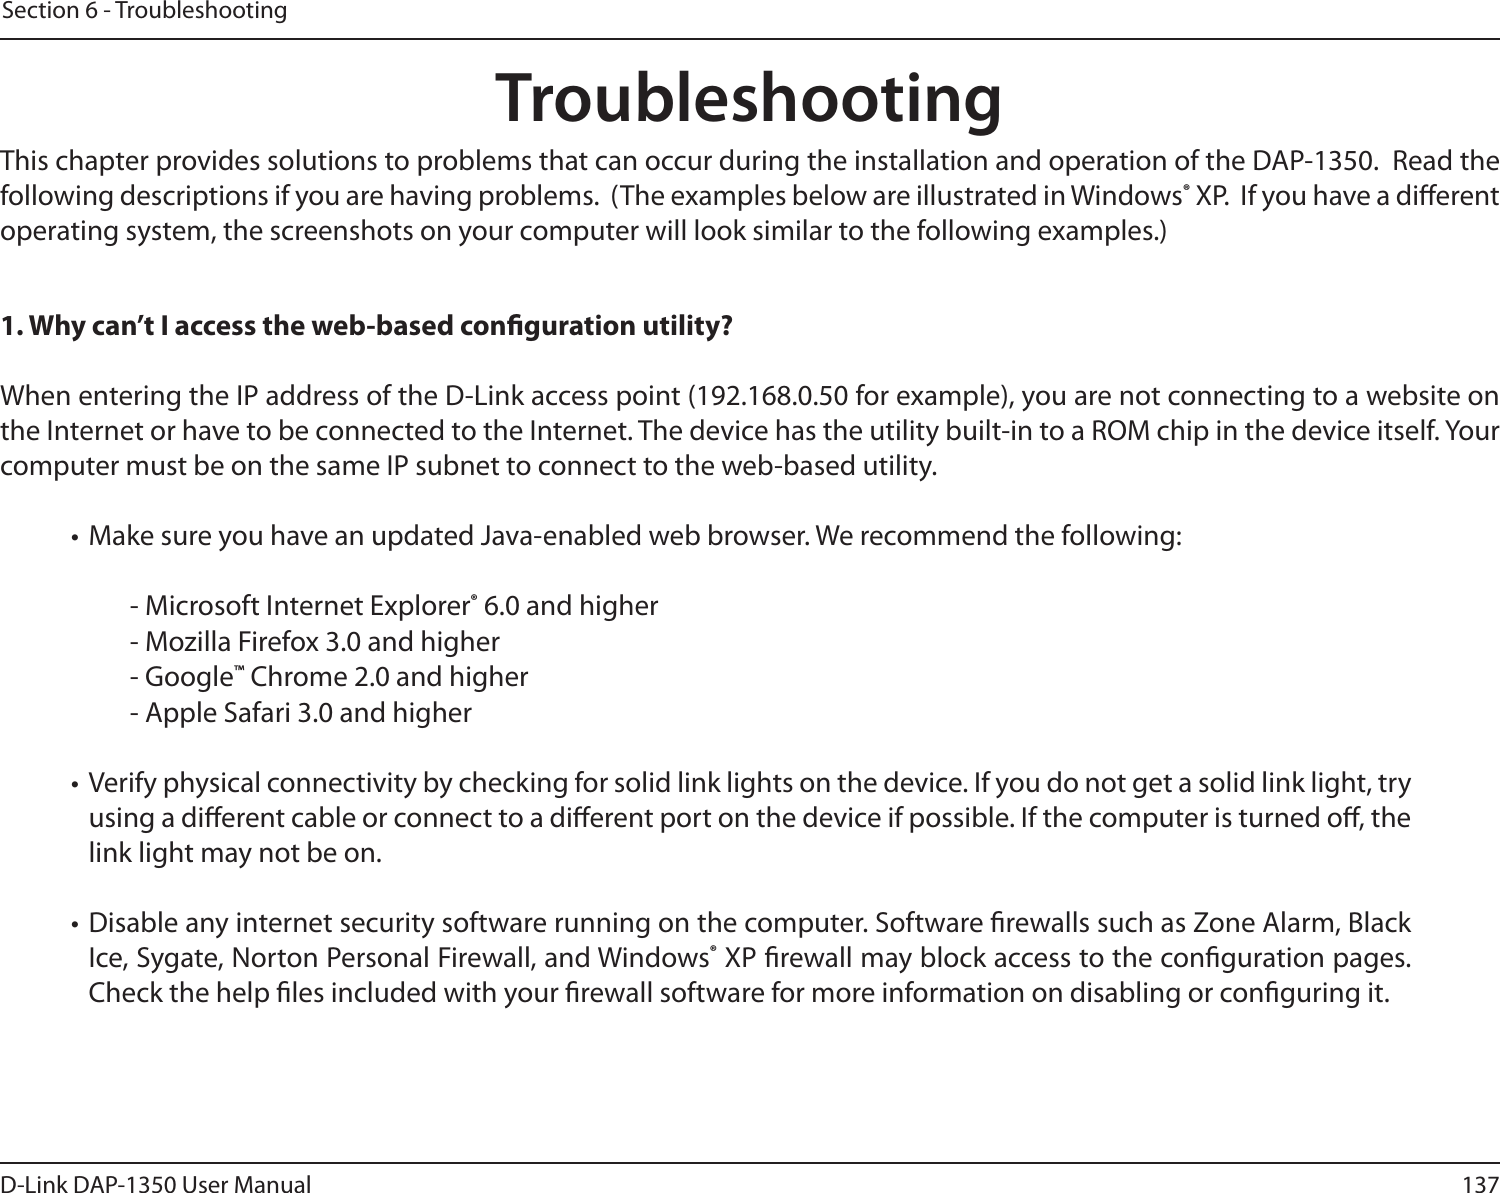 137D-Link DAP-1350 User ManualSection 6 - TroubleshootingTroubleshootingThis chapter provides solutions to problems that can occur during the installation and operation of the DAP-1350.  Read the following descriptions if you are having problems.  (The examples below are illustrated in Windows® XP.  If you have a dierent operating system, the screenshots on your computer will look similar to the following examples.)1. Why can’t I access the web-based conguration utility?When entering the IP address of the D-Link access point (192.168.0.50 for example), you are not connecting to a website on the Internet or have to be connected to the Internet. The device has the utility built-in to a ROM chip in the device itself. Your computer must be on the same IP subnet to connect to the web-based utility. • Make sure you have an updated Java-enabled web browser. We recommend the following: - Microsoft Internet Explorer® 6.0 and higher- Mozilla Firefox 3.0 and higher- Google™ Chrome 2.0 and higher- Apple Safari 3.0 and higher• Verify physical connectivity by checking for solid link lights on the device. If you do not get a solid link light, try using a dierent cable or connect to a dierent port on the device if possible. If the computer is turned o, the link light may not be on.• Disable any internet security software running on the computer. Software rewalls such as Zone Alarm, Black Ice, Sygate, Norton Personal Firewall, and Windows® XP rewall may block access to the conguration pages. Check the help les included with your rewall software for more information on disabling or conguring it.